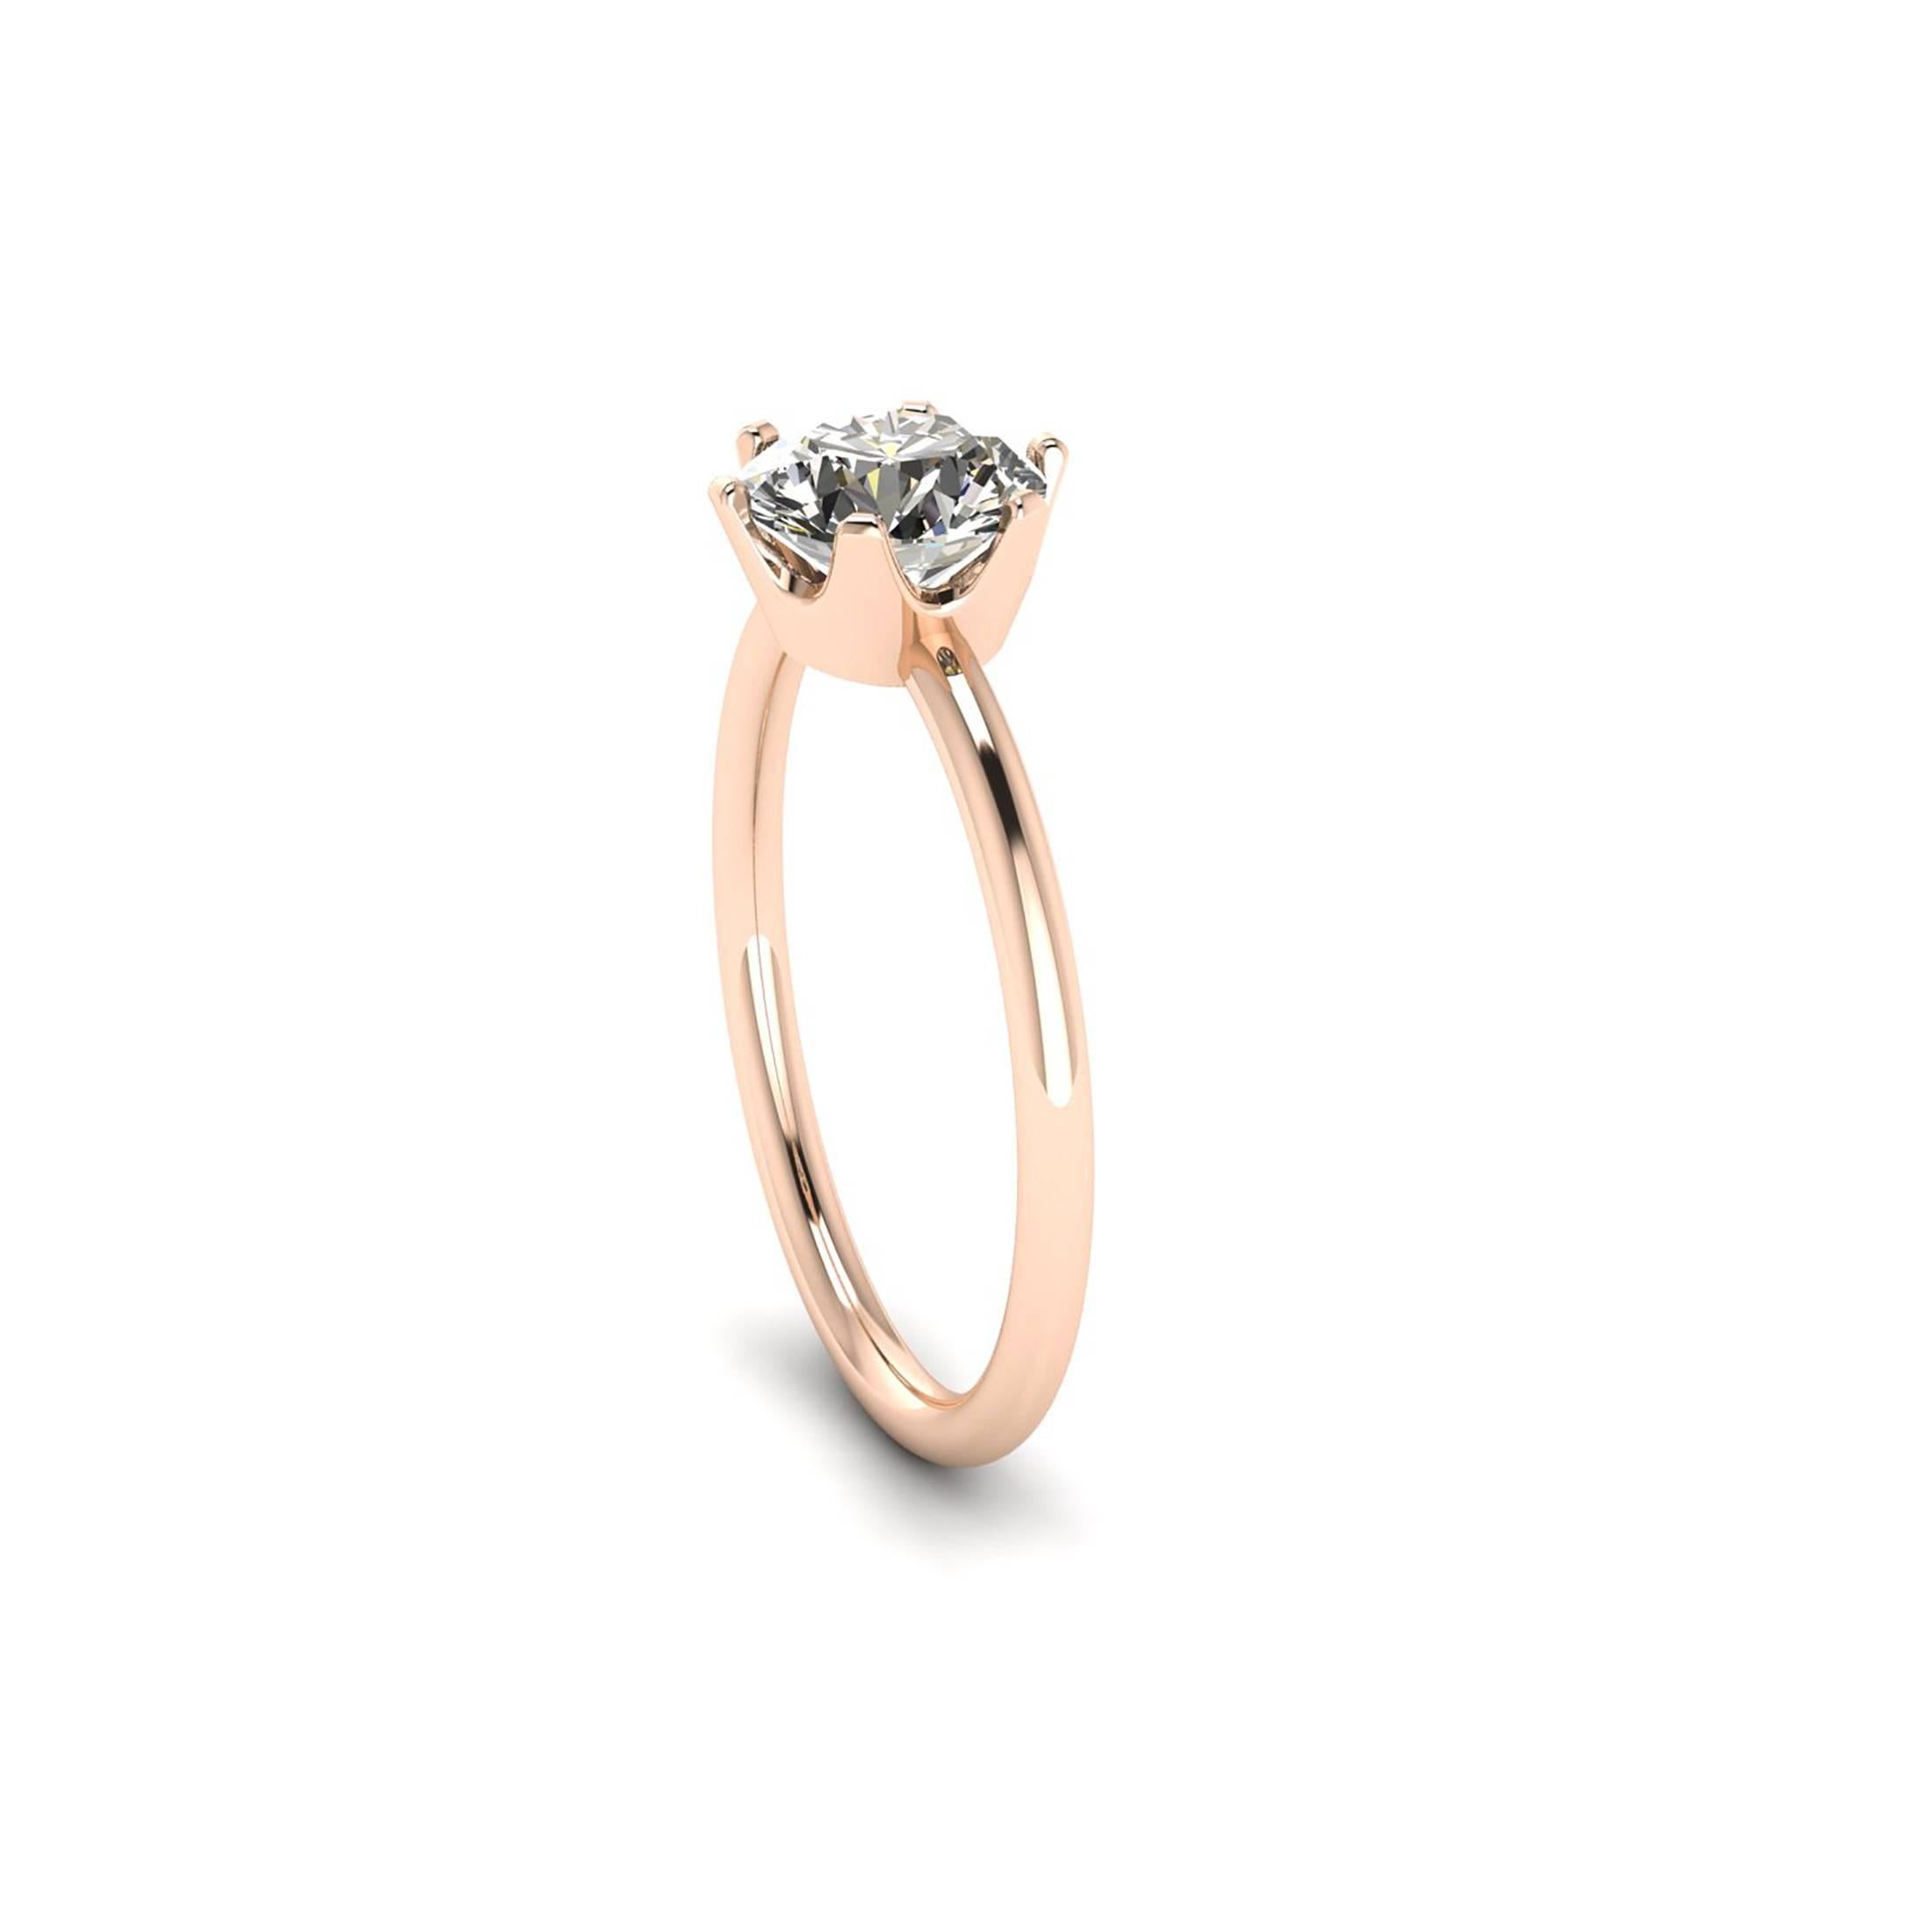 GIA Certified 1.01 Carat white diamond, J color, SI2 clarity, hand set in in hand made 18k rose gold solitaire ring, conceived in New York City, with the best Italian manufacturing.

The original GIA Certificate will accompany the ring.

Ring size 5